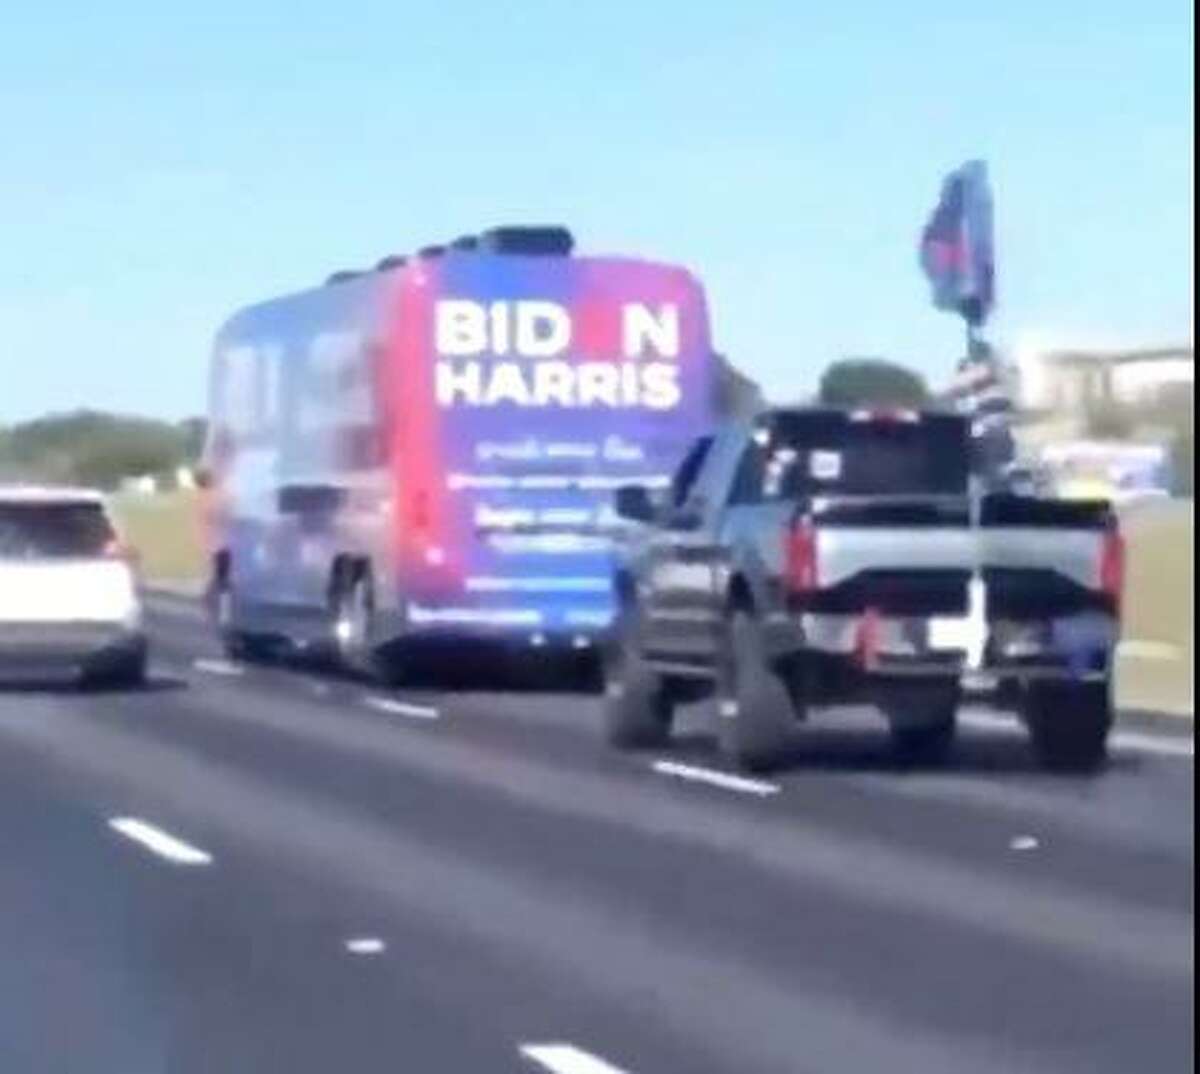 The FBI has been investigating the alleged harassment of a Biden campaign bus that was surrounded by a caravan of cars and trucks displaying Trump 2020 flags in November 2020 near Pflugerville, Texas.